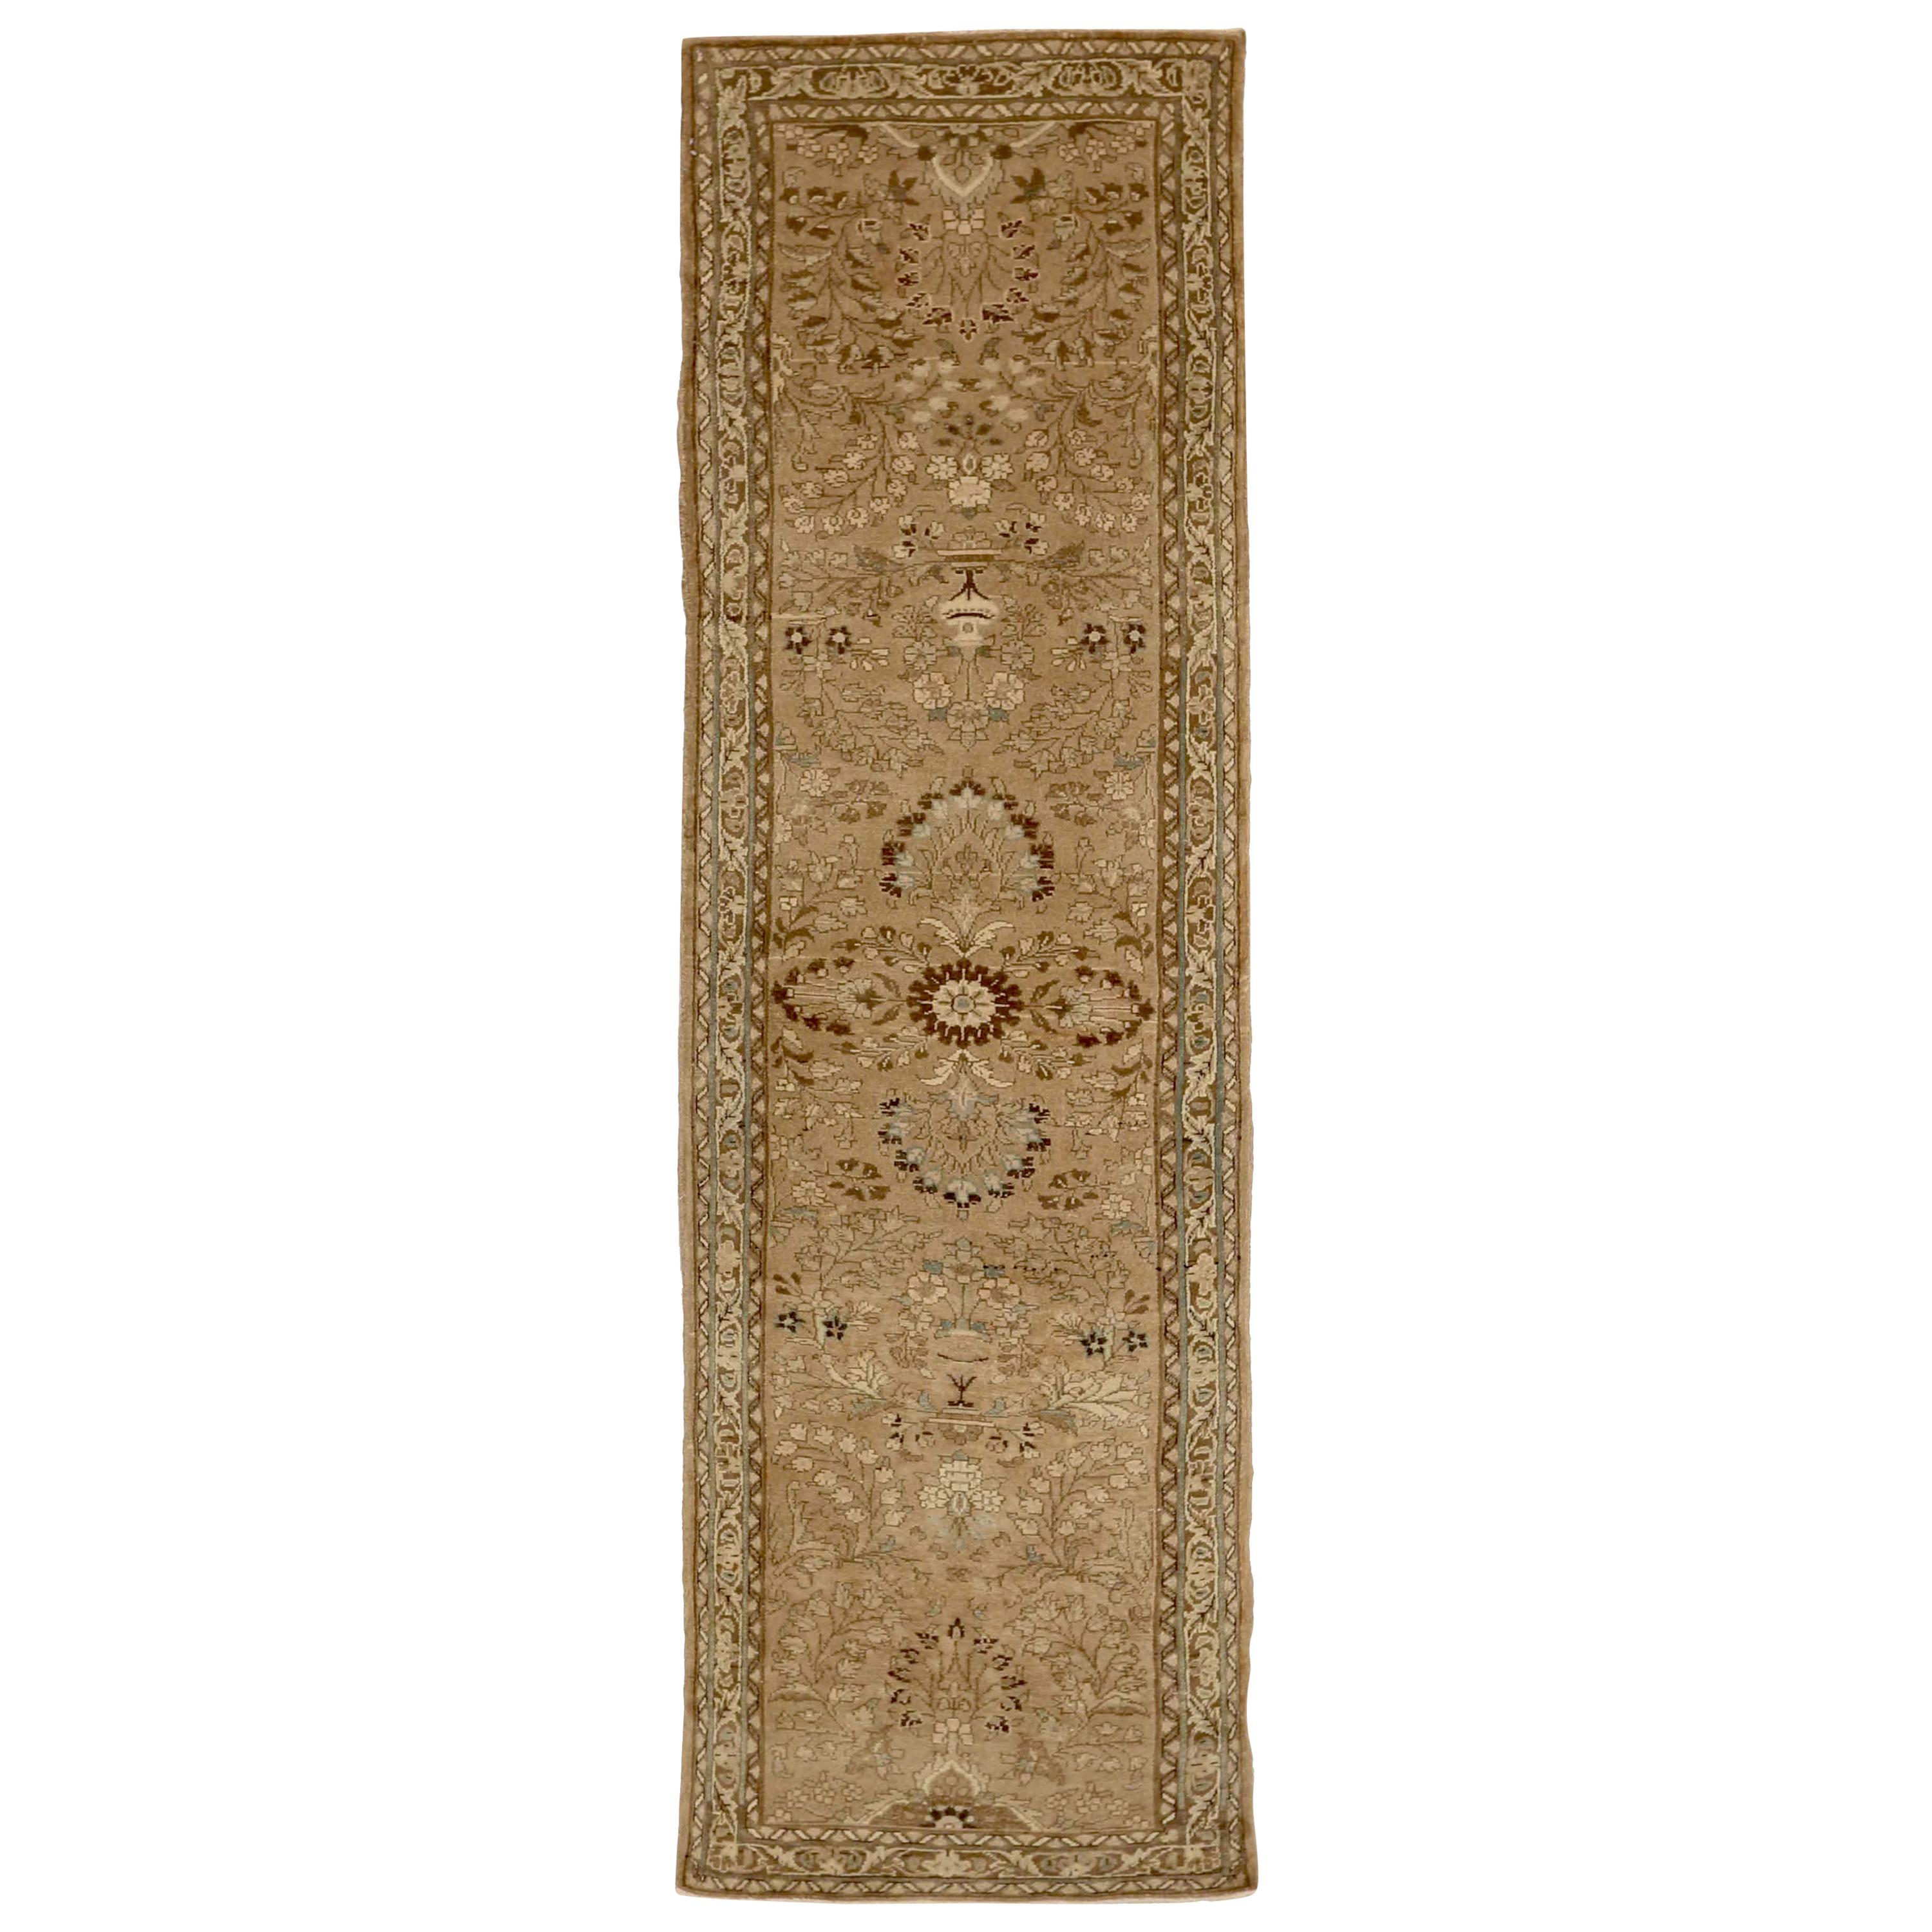 Antique Persian Malayer Runner Rug with Brown and Ivory Floral Details